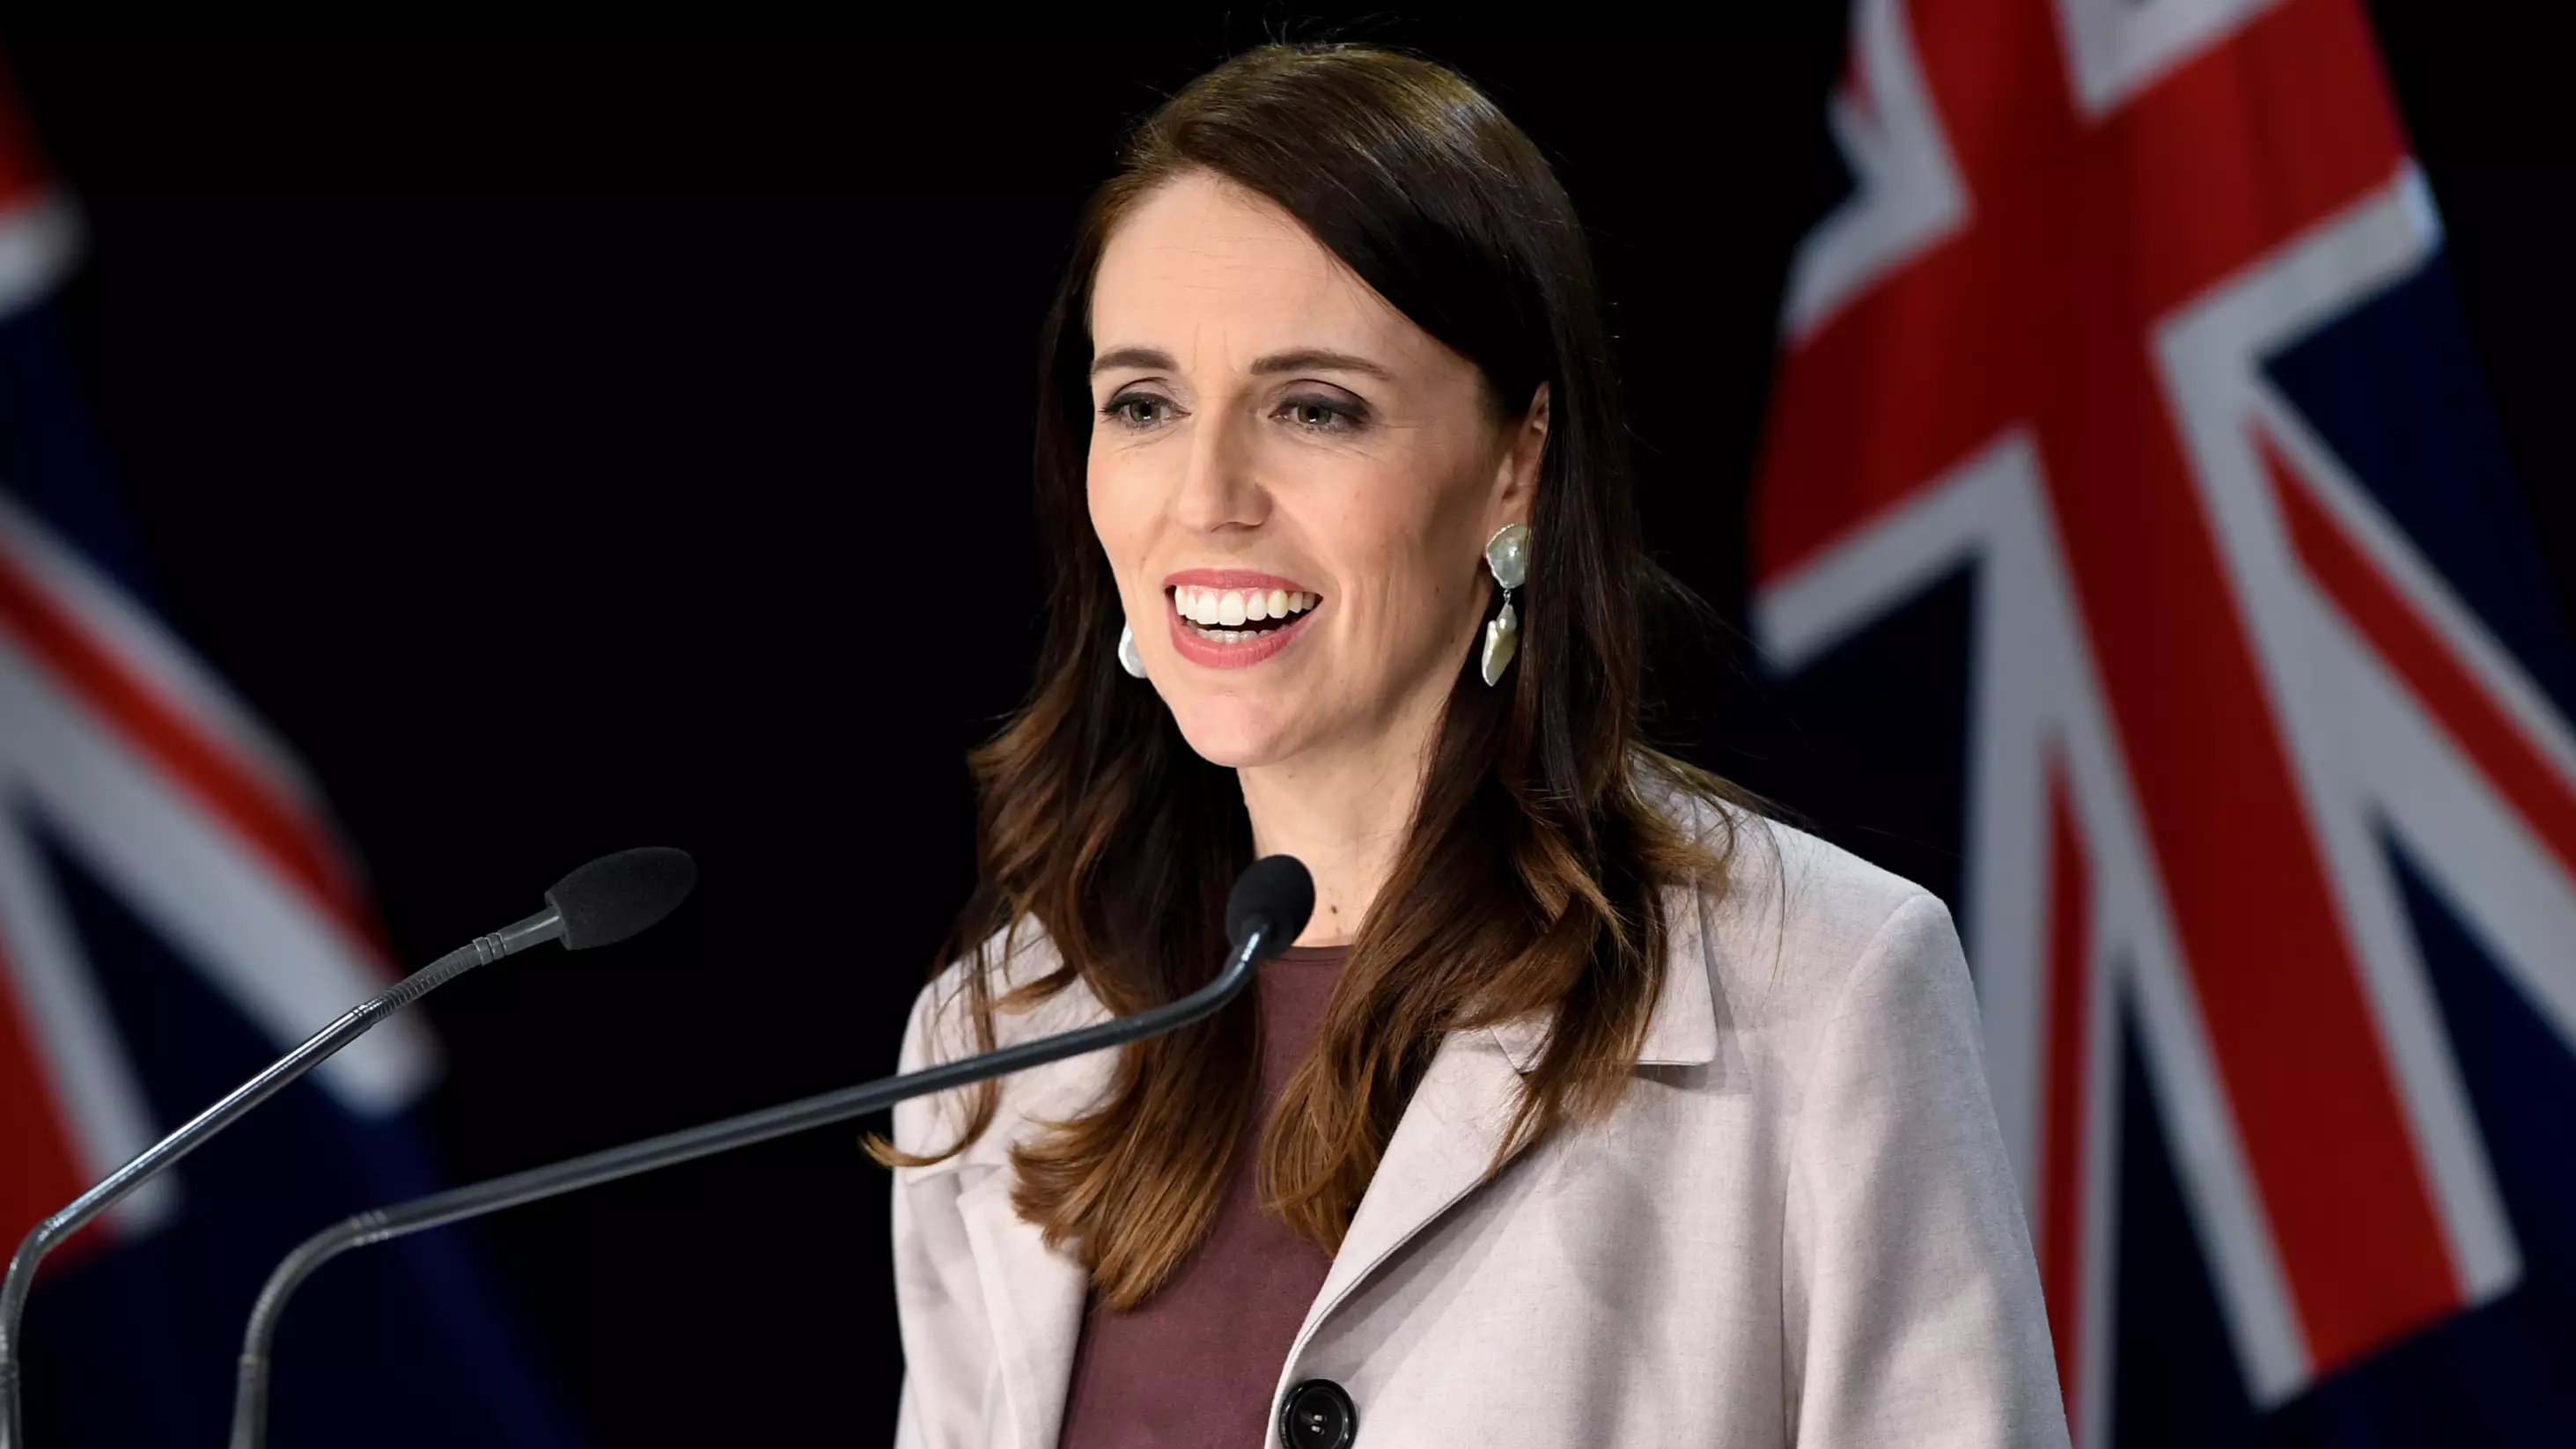 Jacinda Ardern Announces New Rule To Double Annual Sick Leave From Five To 10 Days